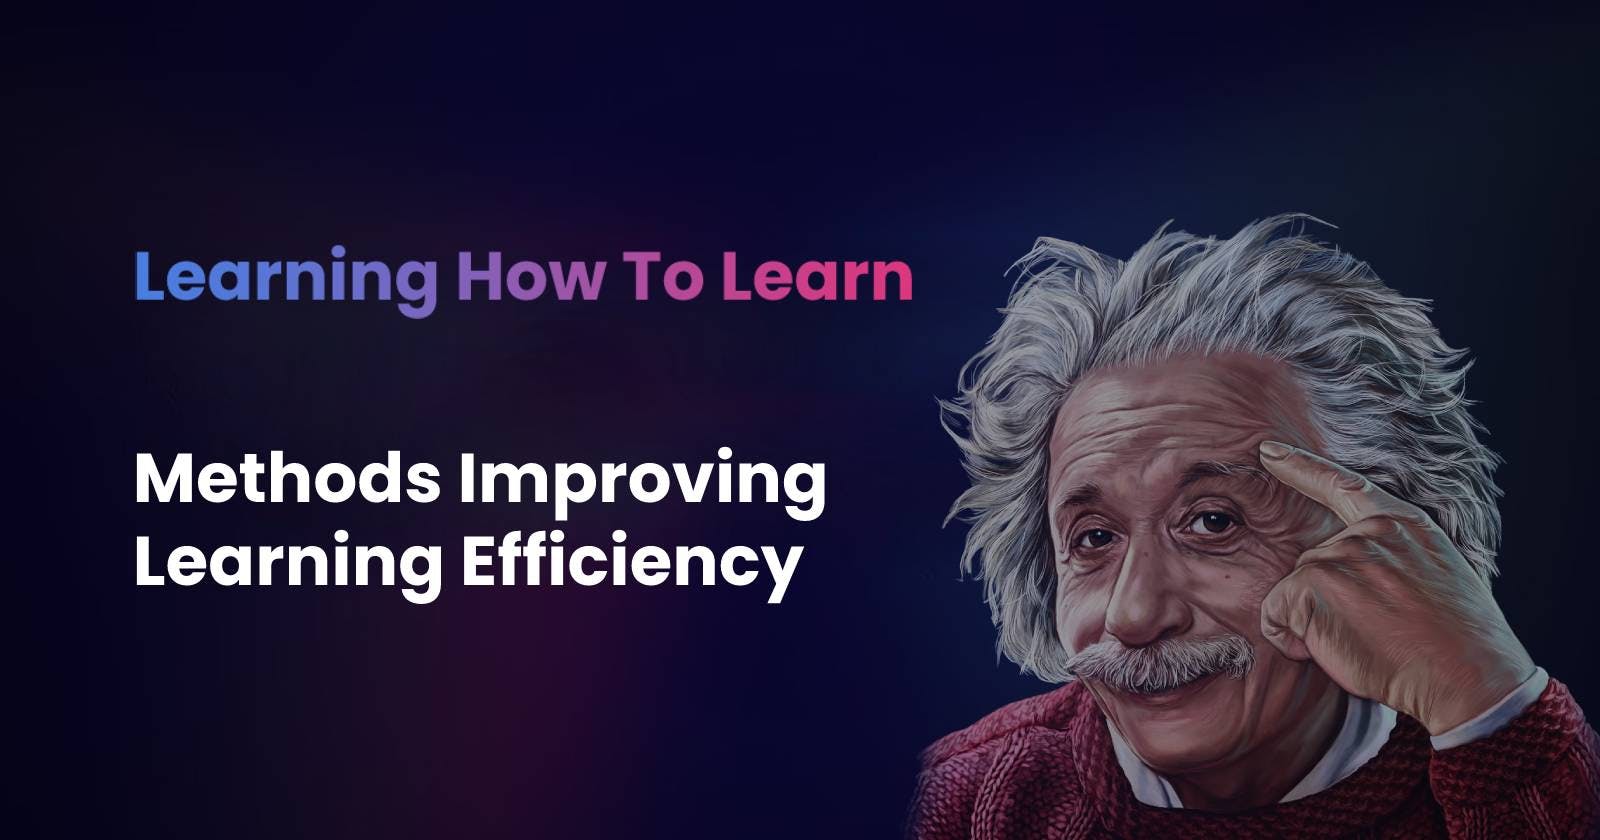 Learning How to Learn. Methods for Improving Learning Efficiency.